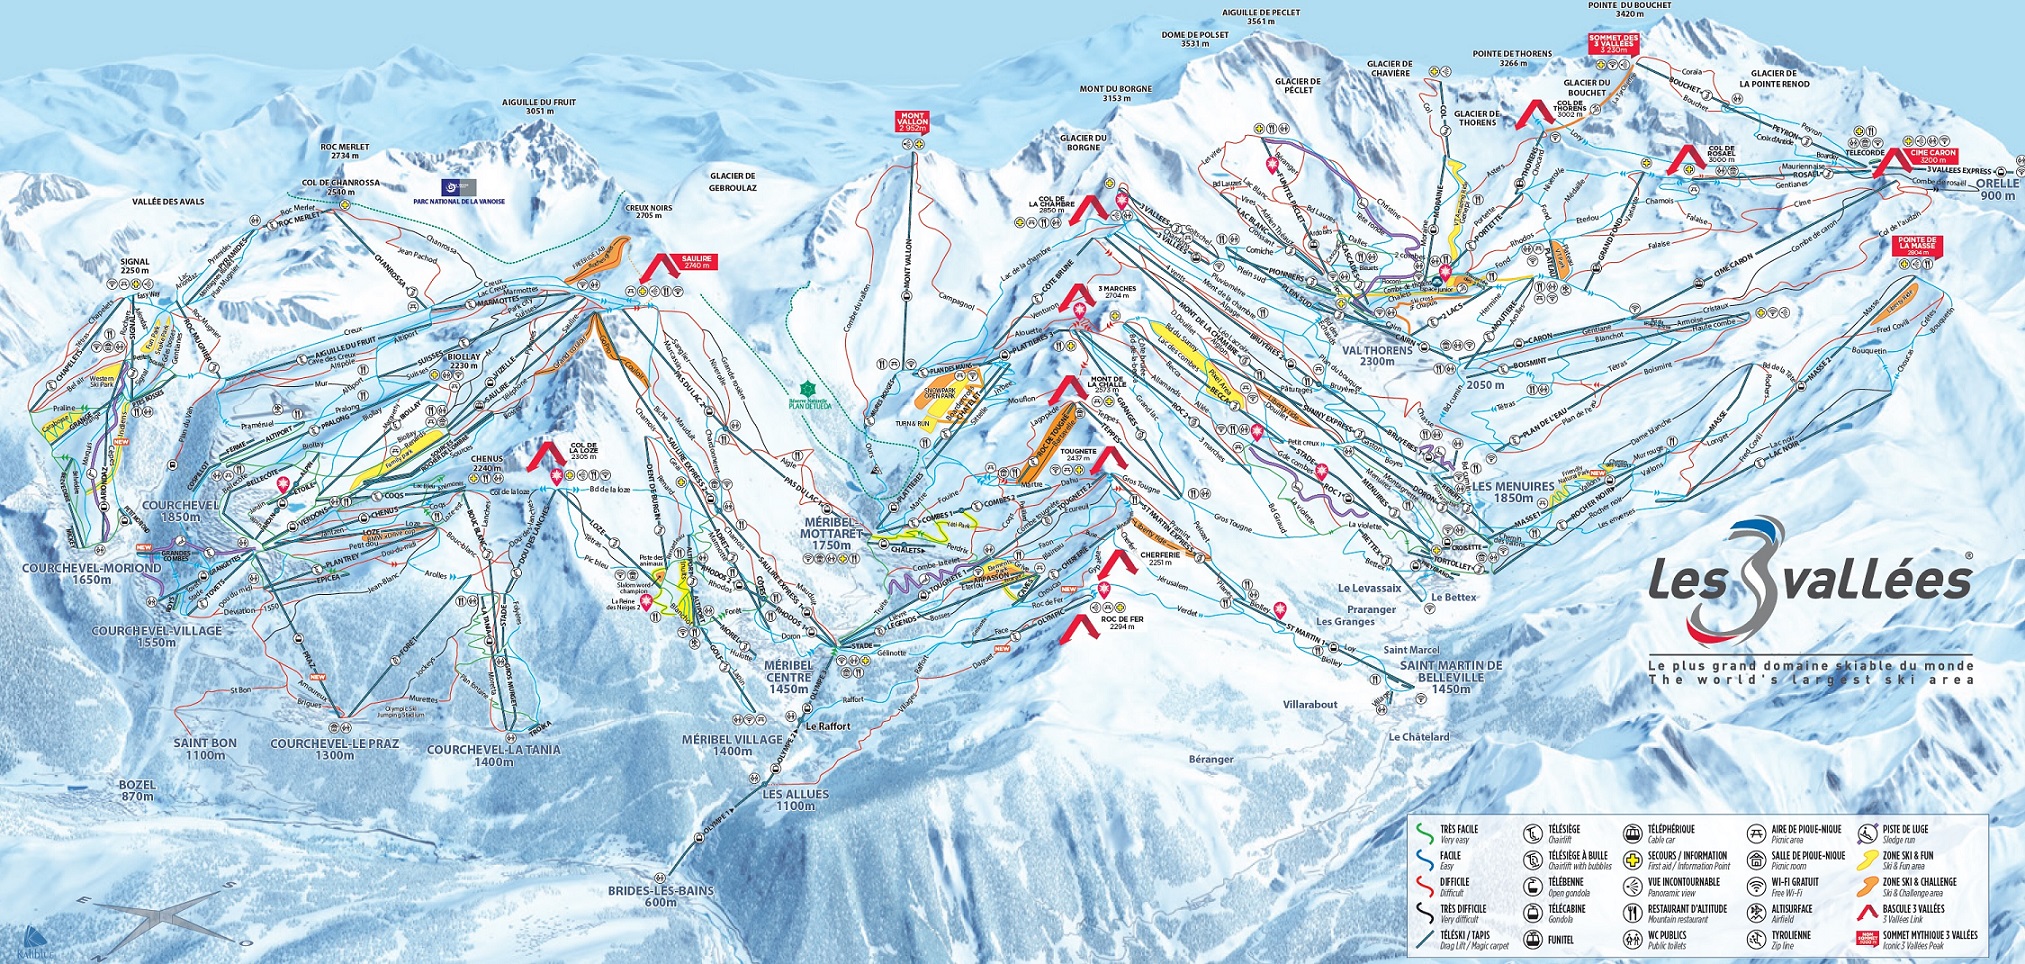 An expert guide to ski holidays in Courchevel, France